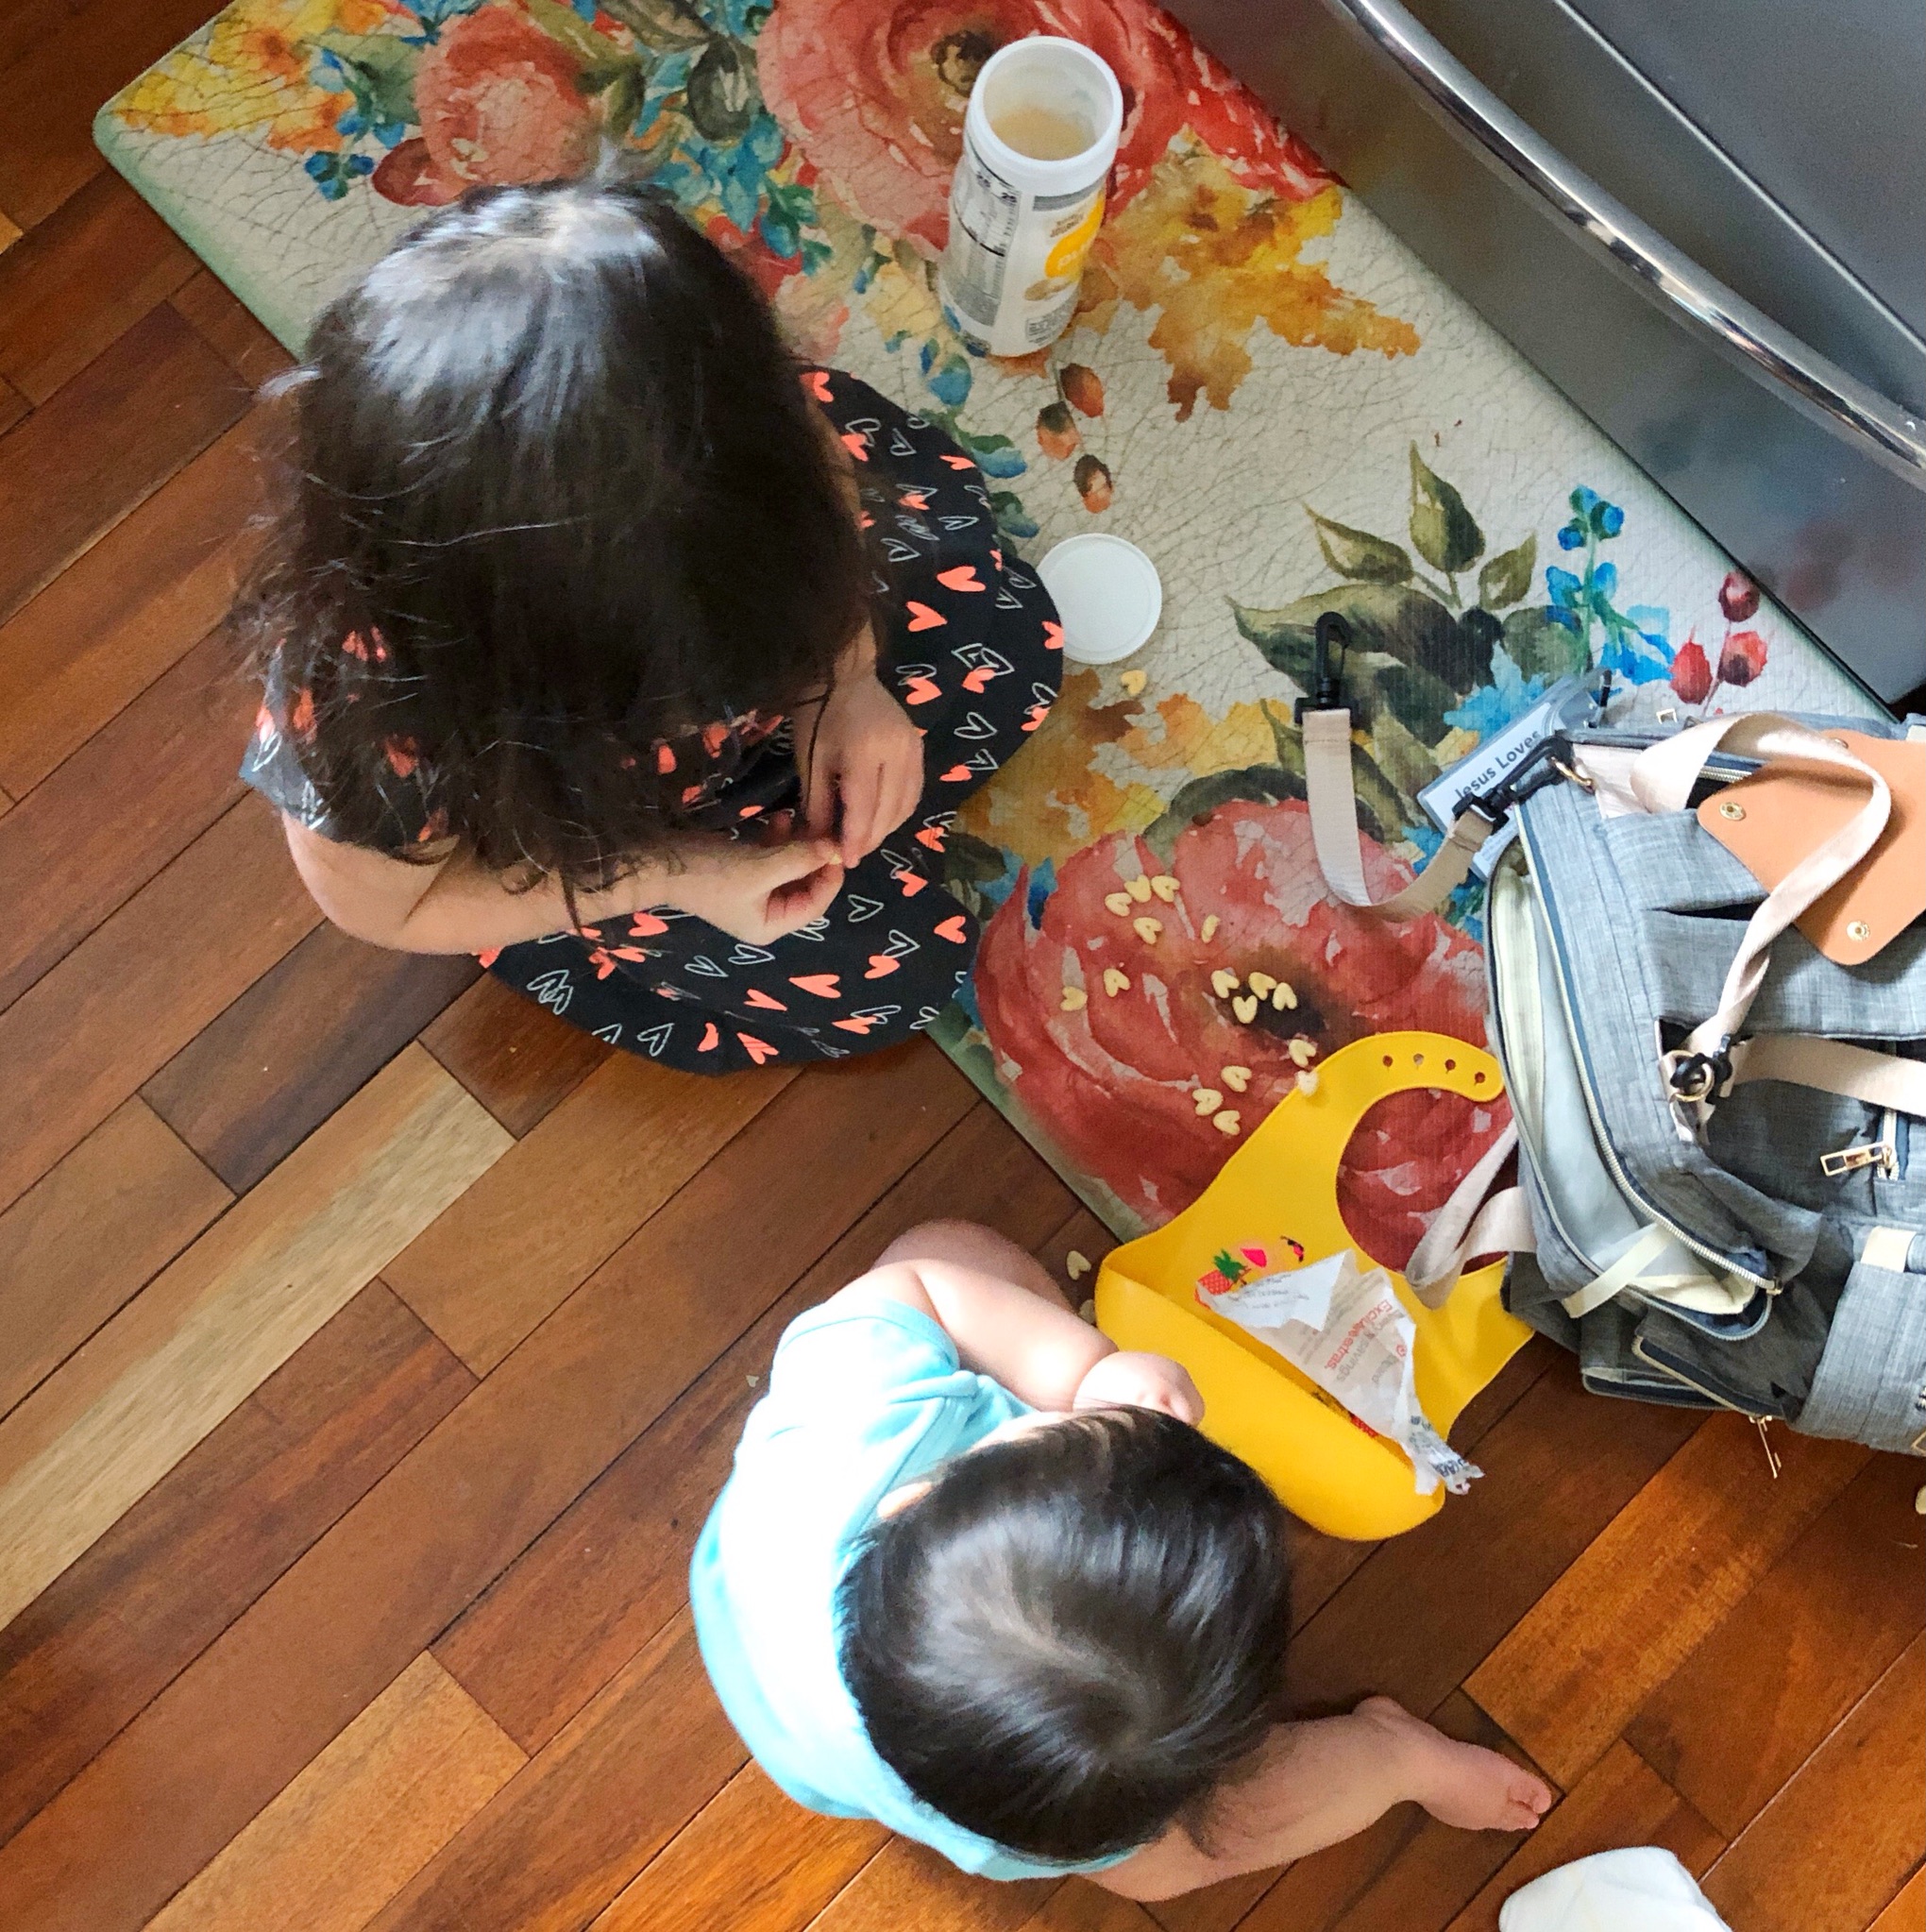 Going from one child to two, with a big sister and a little sister picnicking on the floor.